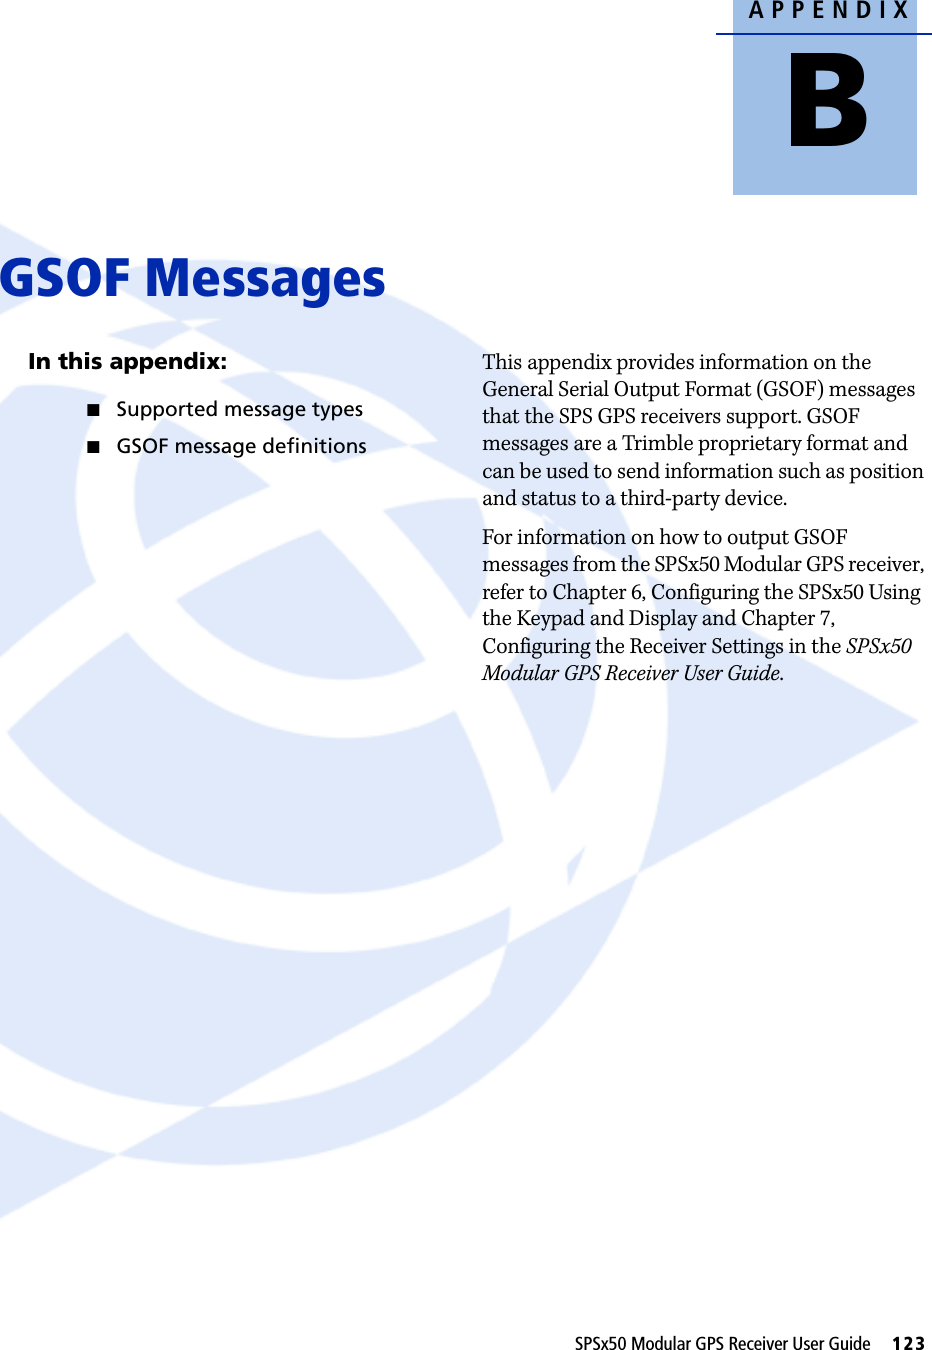 APPENDIXBSPSx50 Modular GPS Receiver User Guide     123GSOF Messages BIn this appendix:QSupported message typesQGSOF message definitionsThis appendix provides information on the General Serial Output Format (GSOF) messages that the SPS GPS receivers support. GSOF messages are a Trimble proprietary format and can be used to send information such as position and status to a third-party device.For information on how to output GSOF messages from the SPSx50 Modular GPS receiver, refer to Chapter 6, Configuring the SPSx50 Using the Keypad and Display and Chapter 7, Configuring the Receiver Settings in the SPSx50 Modular GPS Receiver User Guide.